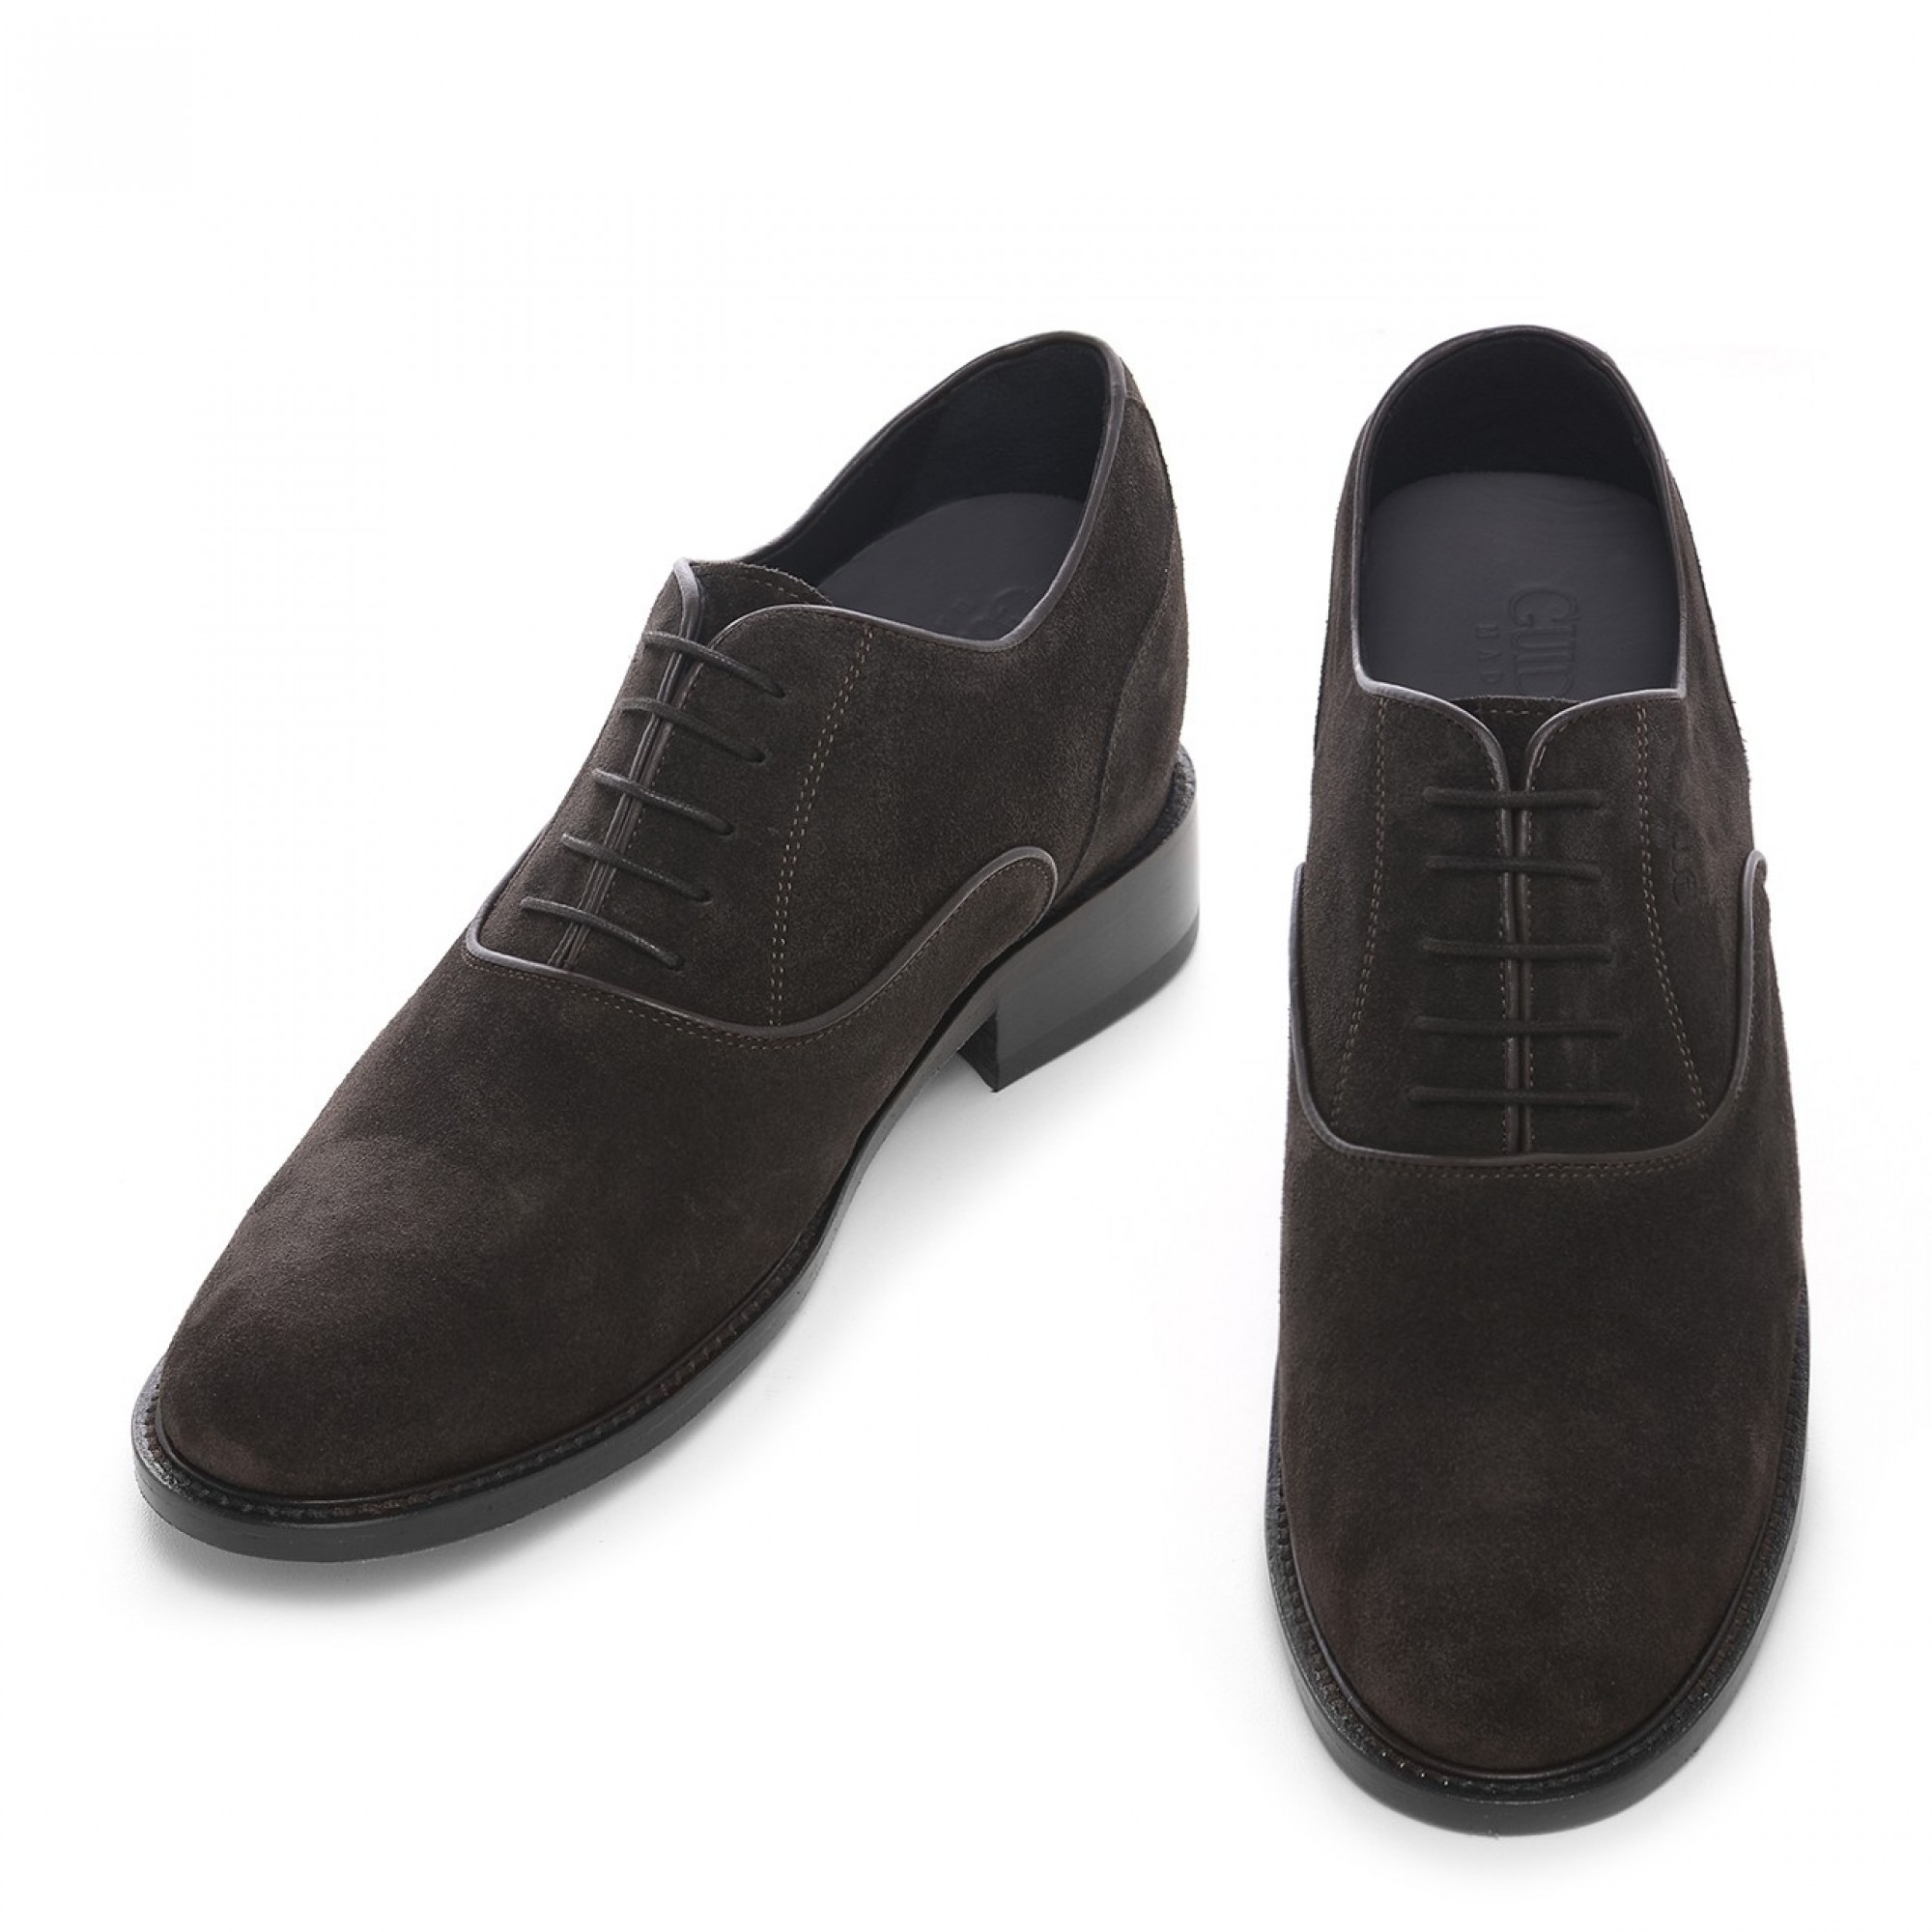 Urbino - Elevator Shoes in Suede Leather from 2.4 to 3.1 inches